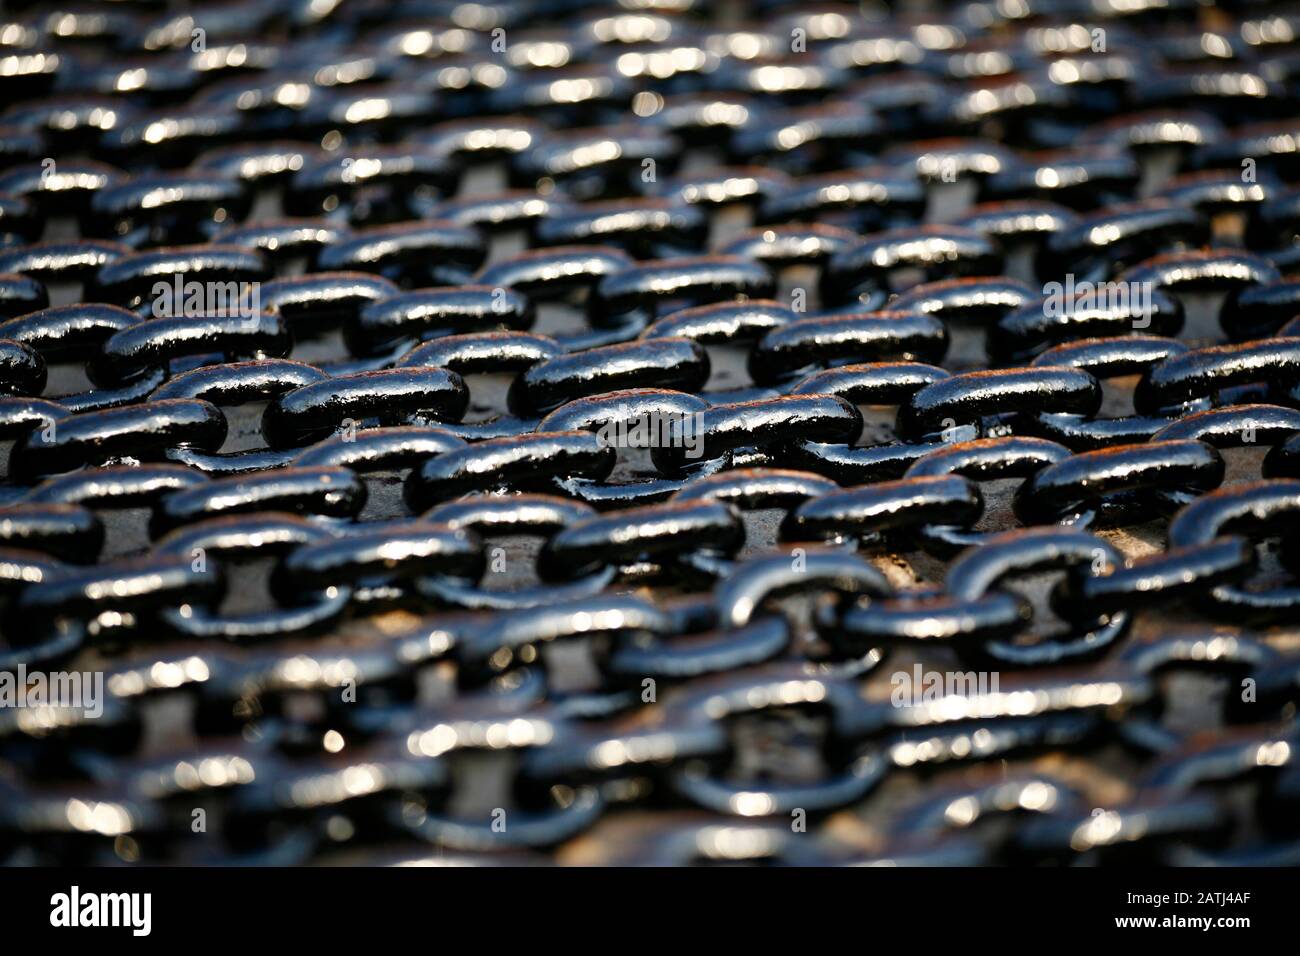 black chain detail in rows Stock Photo